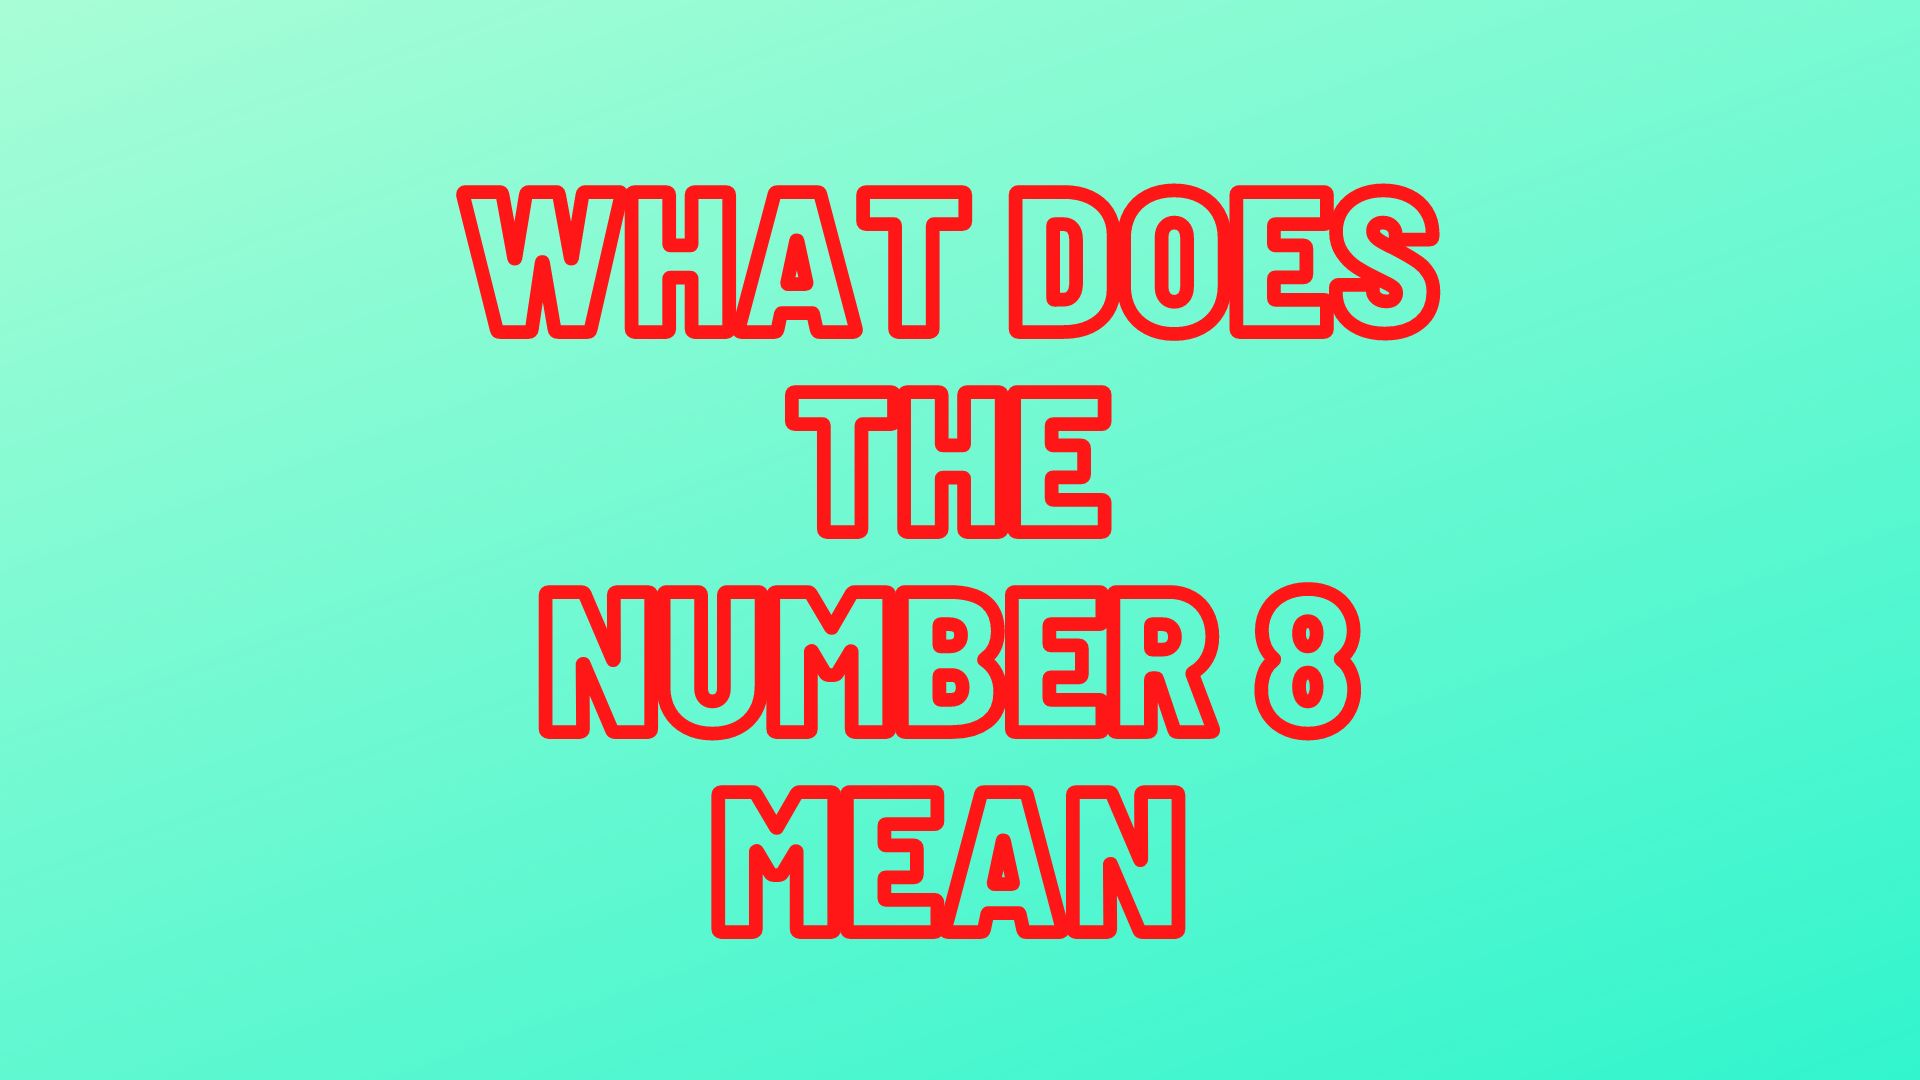 What Does The Number 8 Mean?